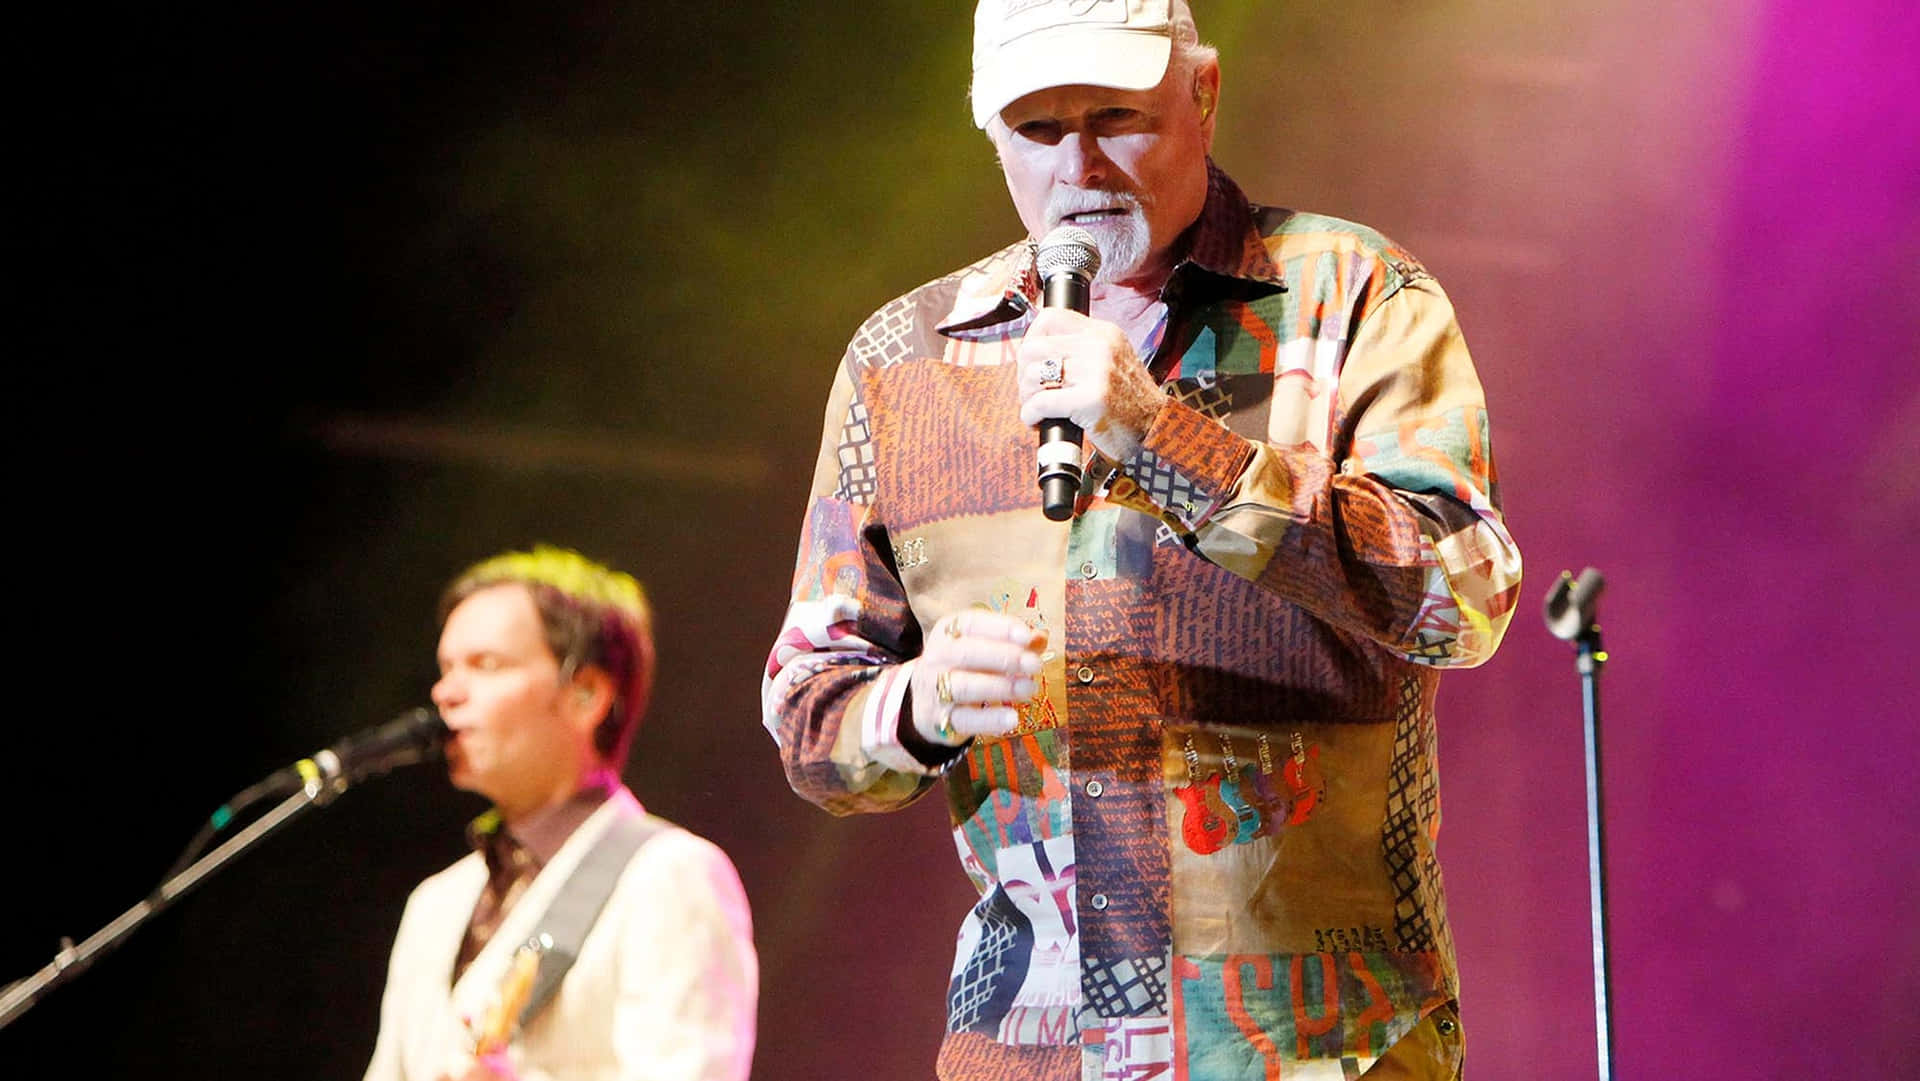 An iconic performance by Mike Love from Beach Boys in Tuscaloosa Wallpaper